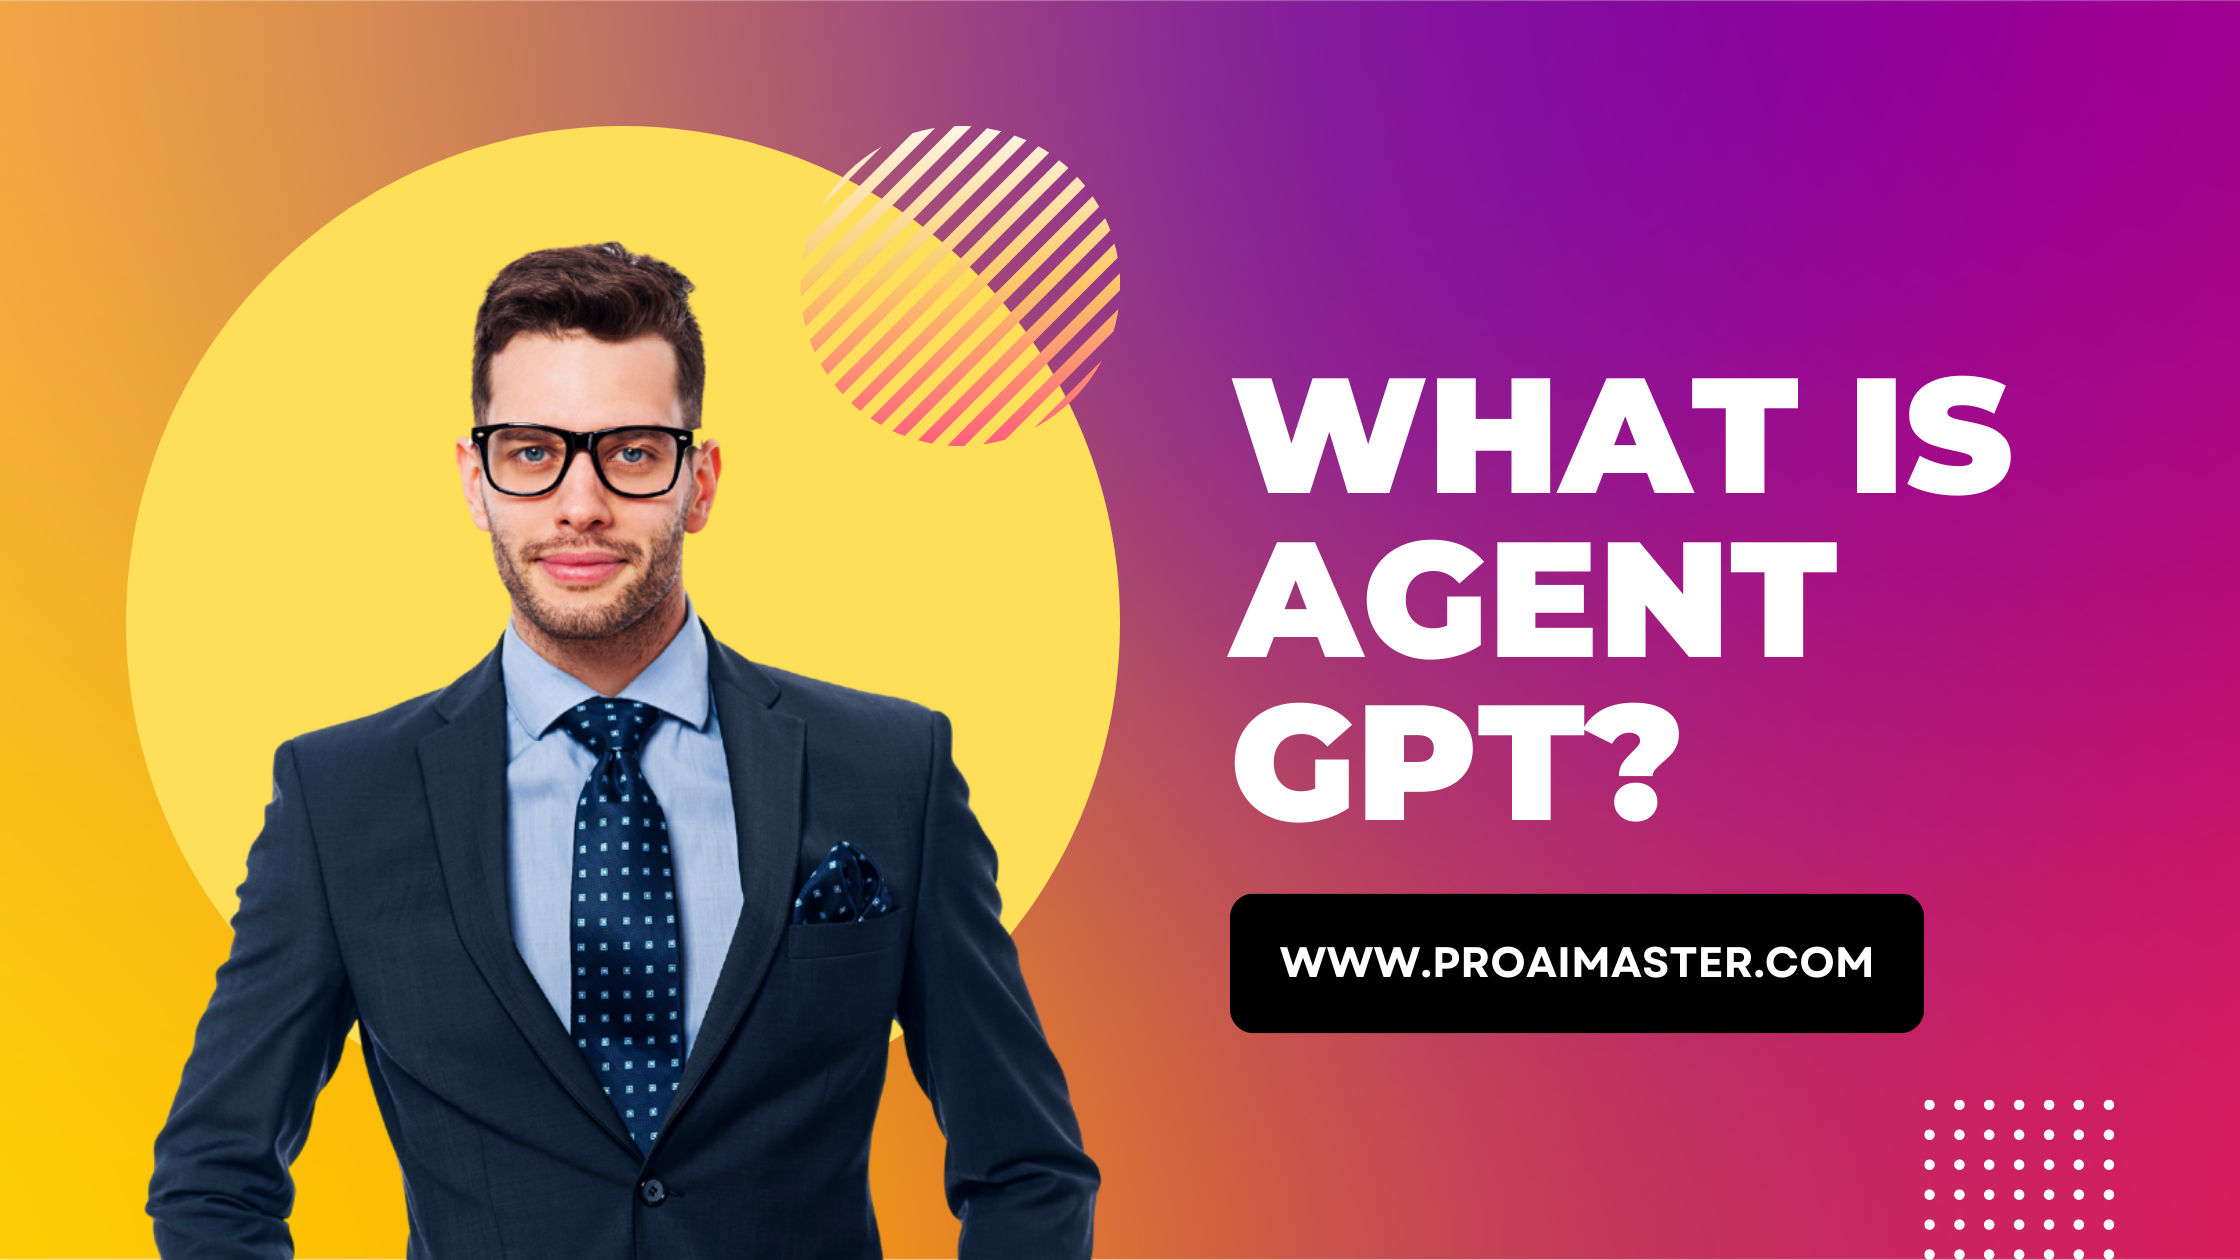 What is Agent GPT?